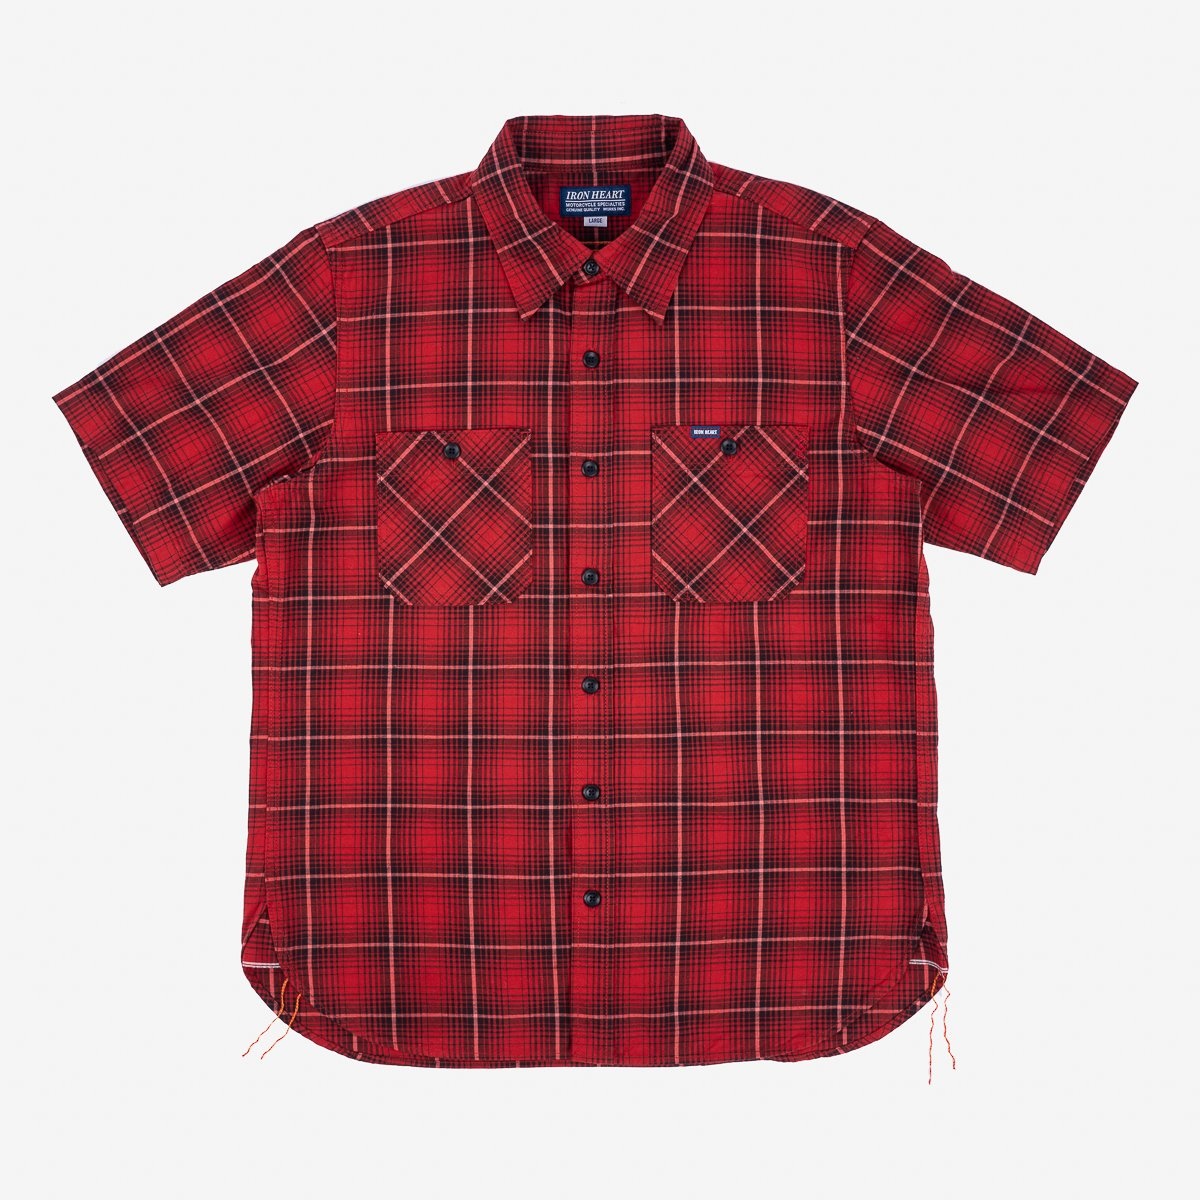 IHSH-392-RED 5oz Selvedge Short Sleeved Work Shirt - Red Vintage Check - 1